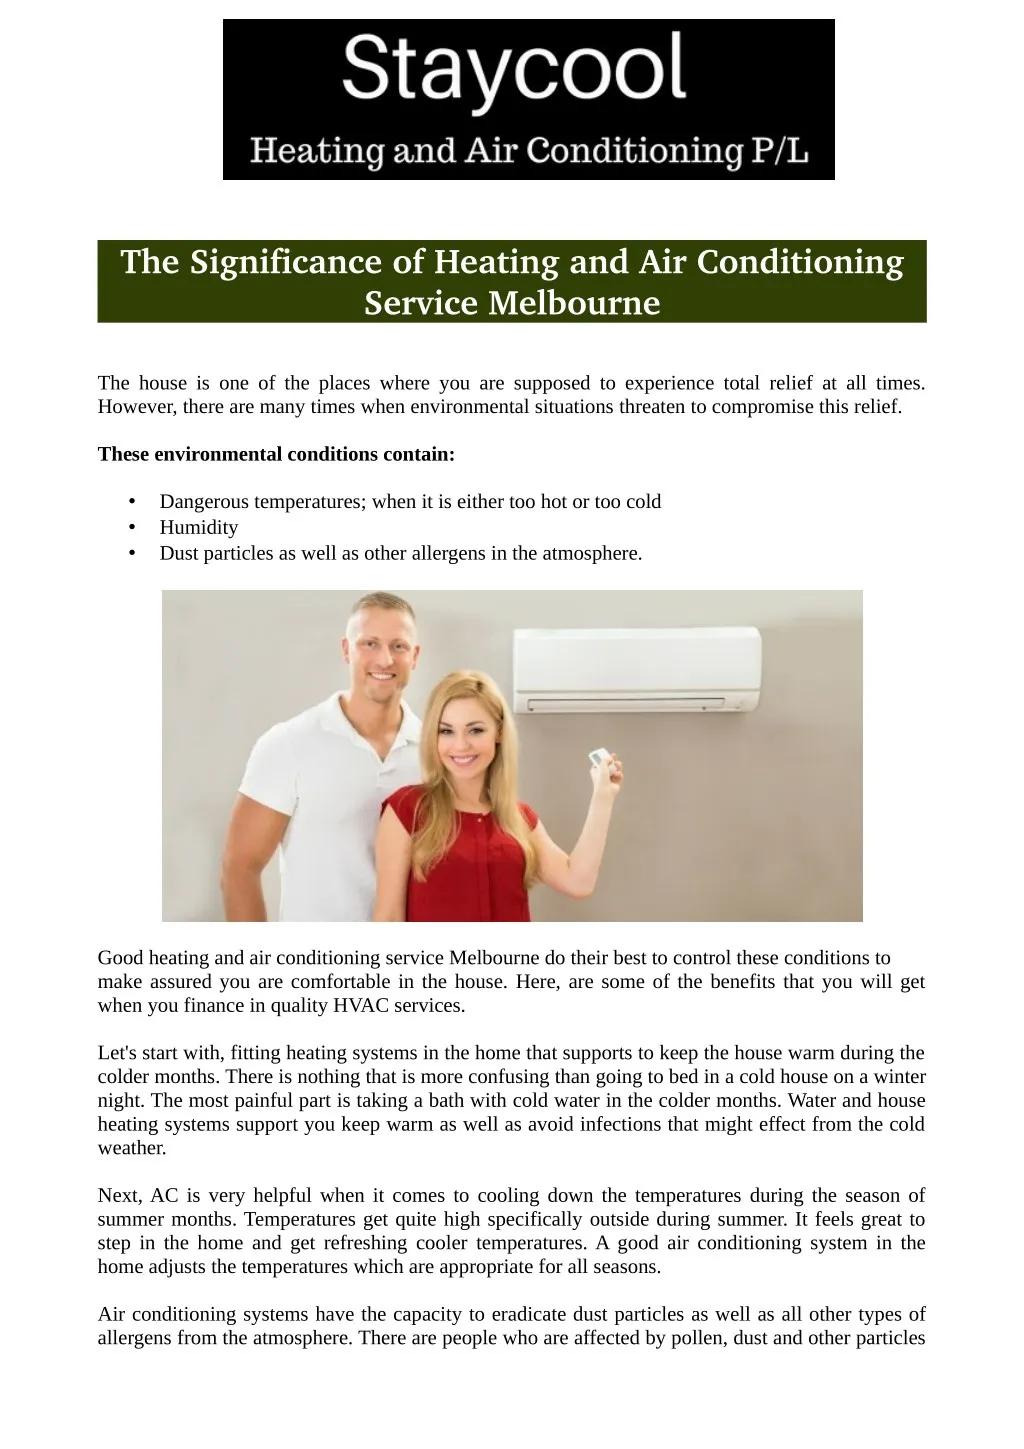 the significance of heating and air conditioning